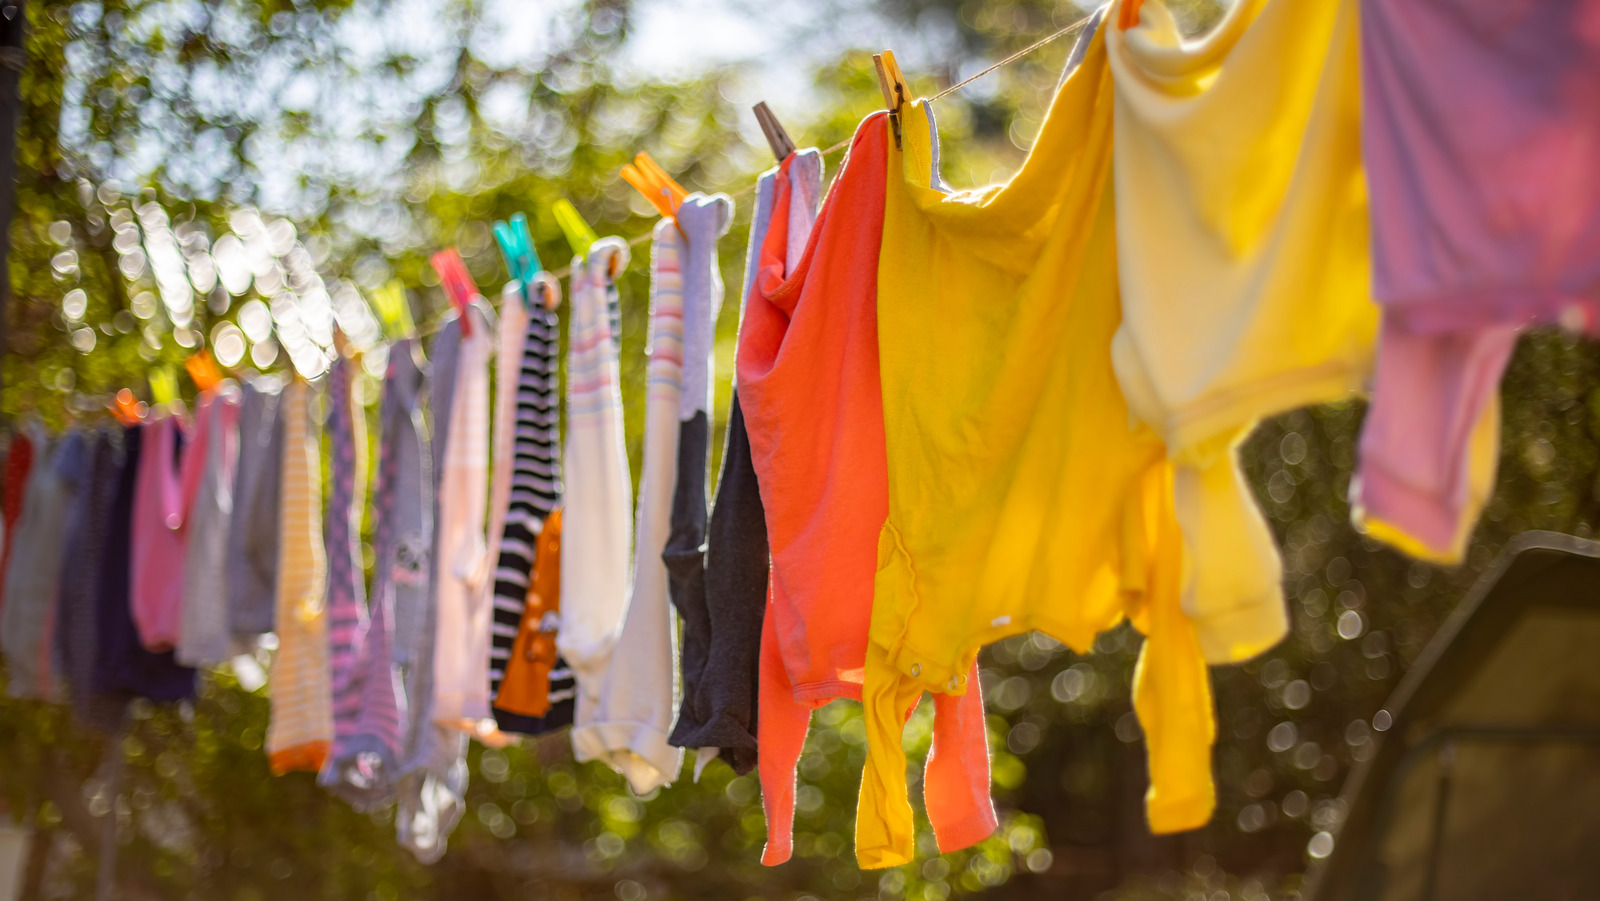 https://www.housedigest.com/img/gallery/should-you-really-dry-your-clothes-outside/l-intro-1652274622.jpg